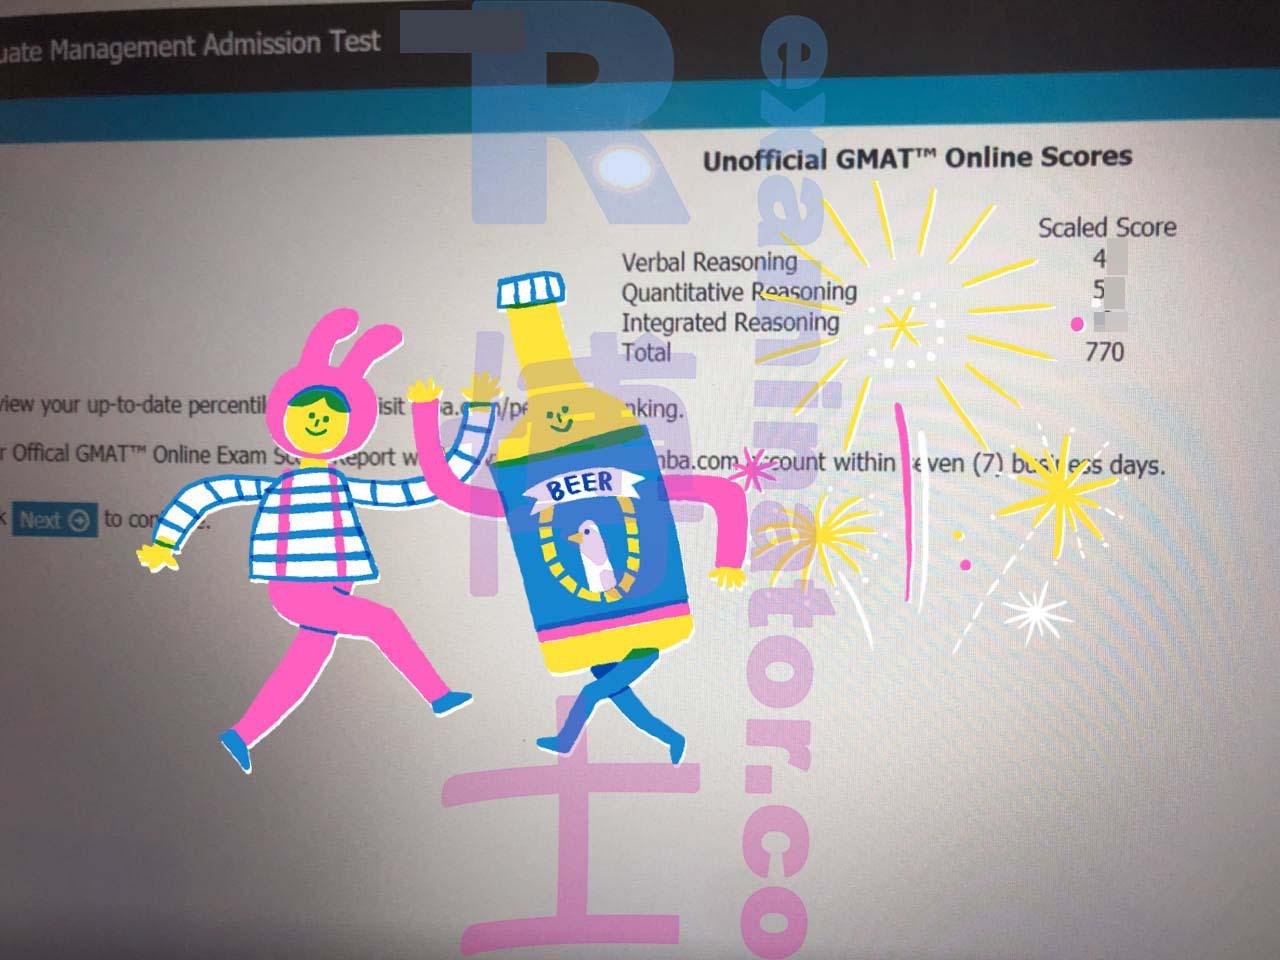 score image for GMAT Cheating success story #169